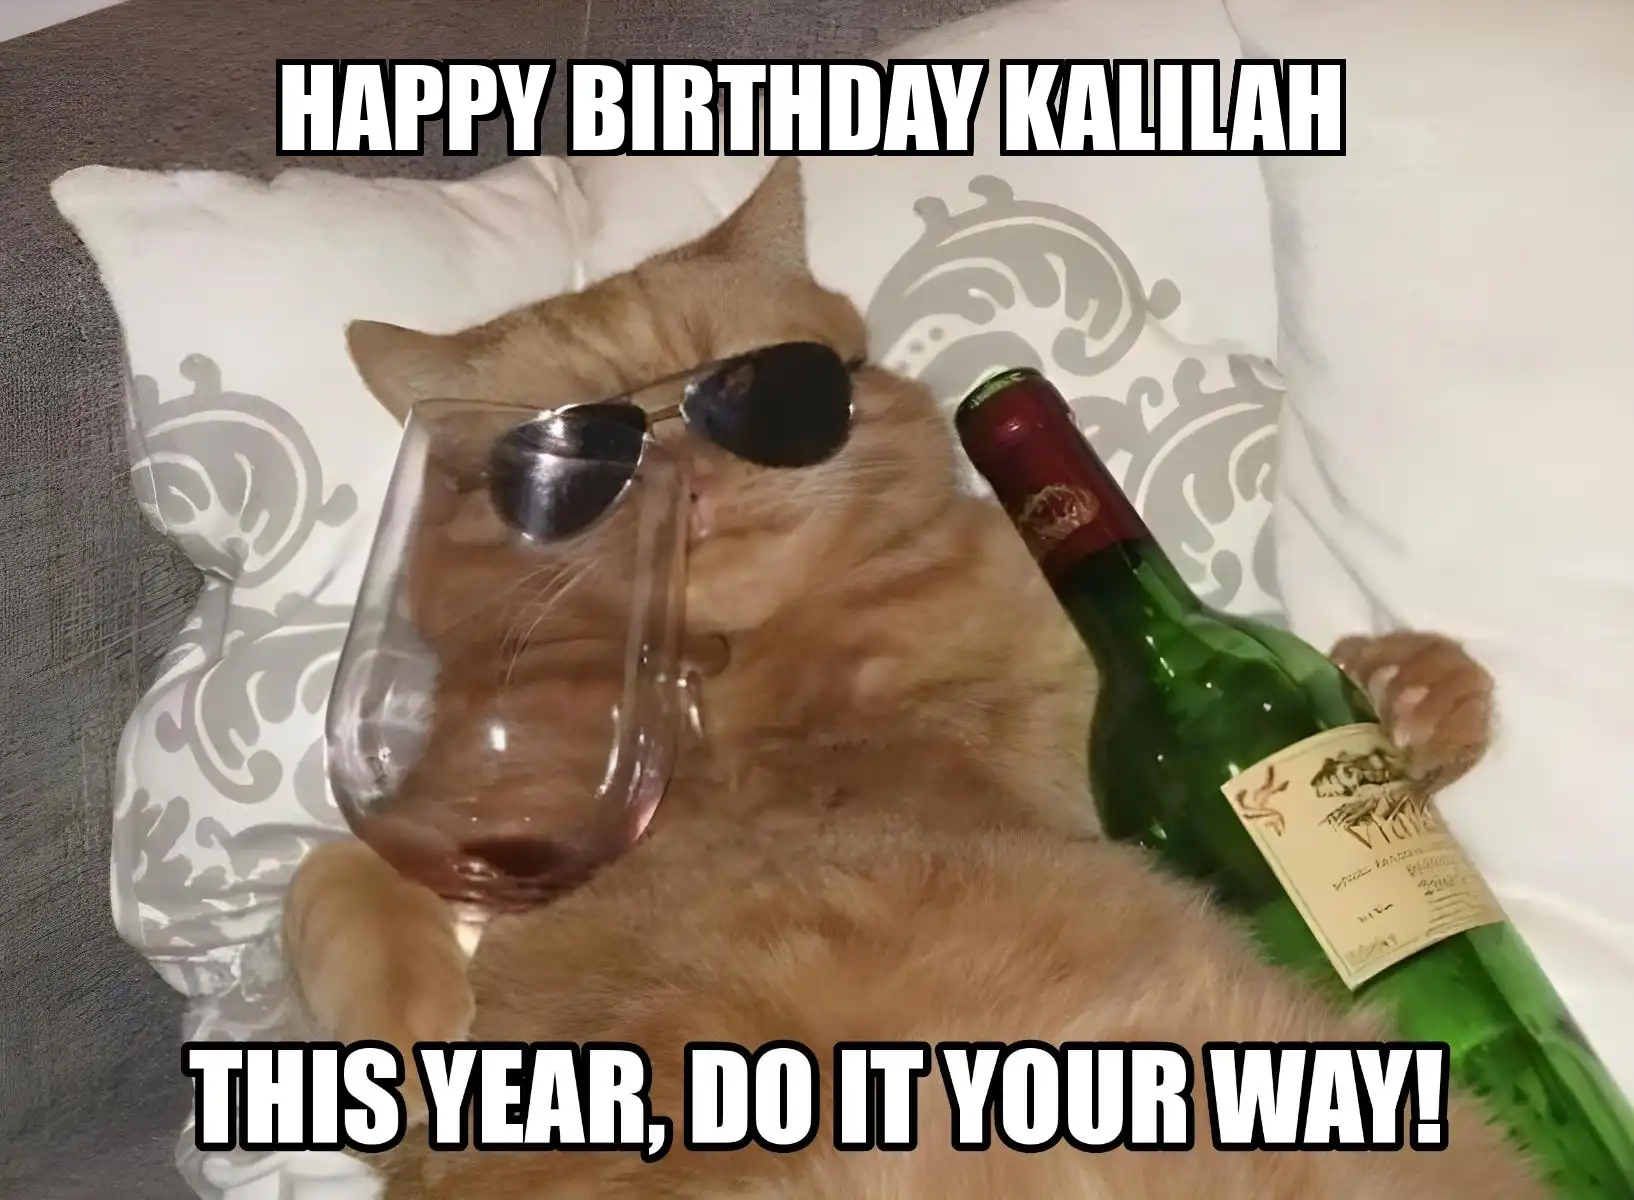 Happy Birthday Kalilah This Year Do It Your Way Meme